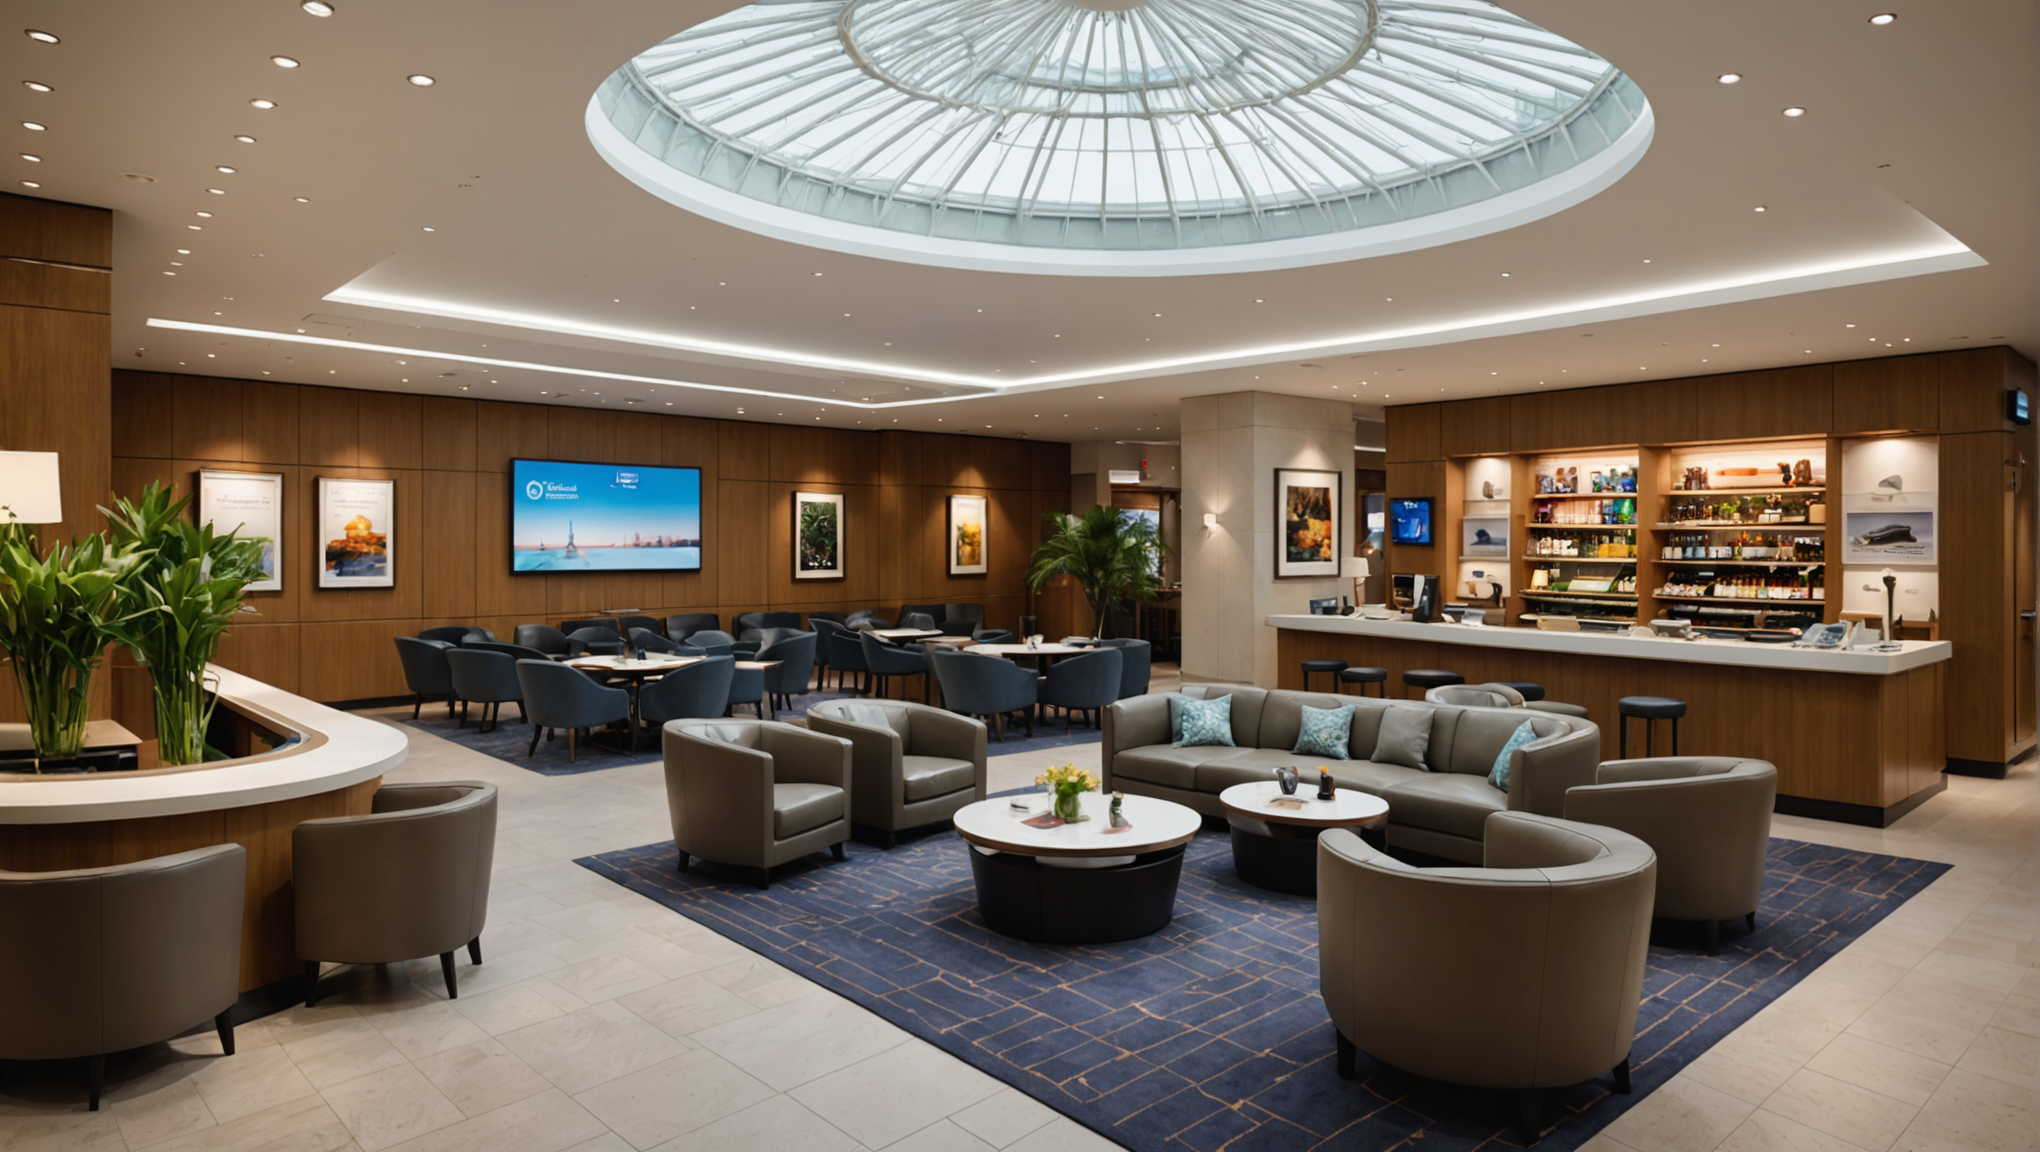 discover the new emirates lounge in terminal 2c at paris-charles-de-gaulle airport. enjoy premium space for your trip with emirates.